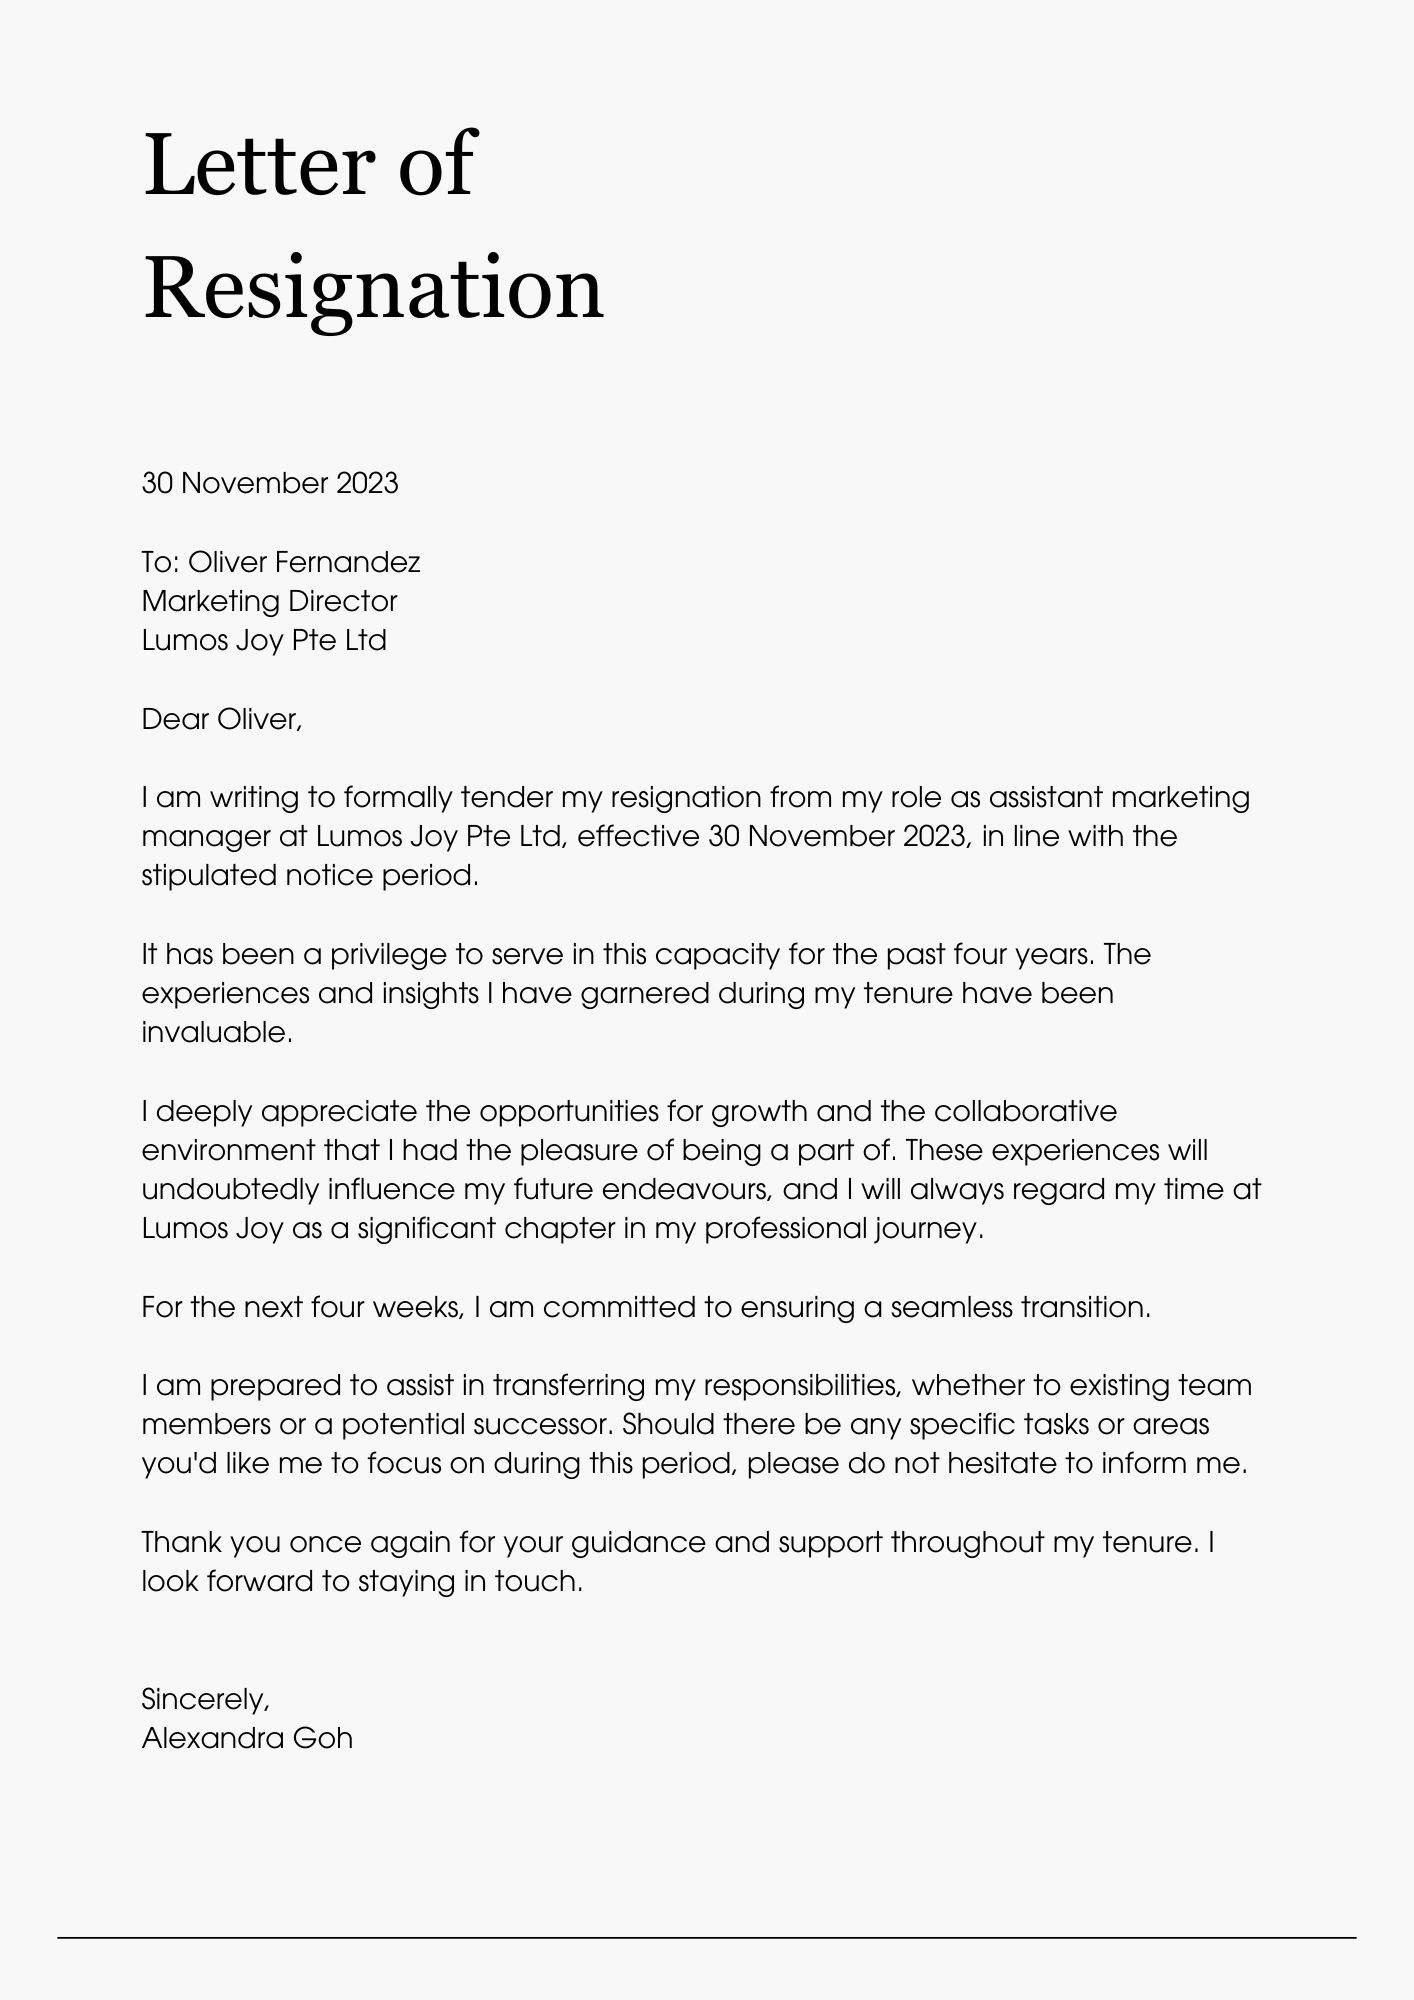 Here is an example of what a resignation letter would look like.